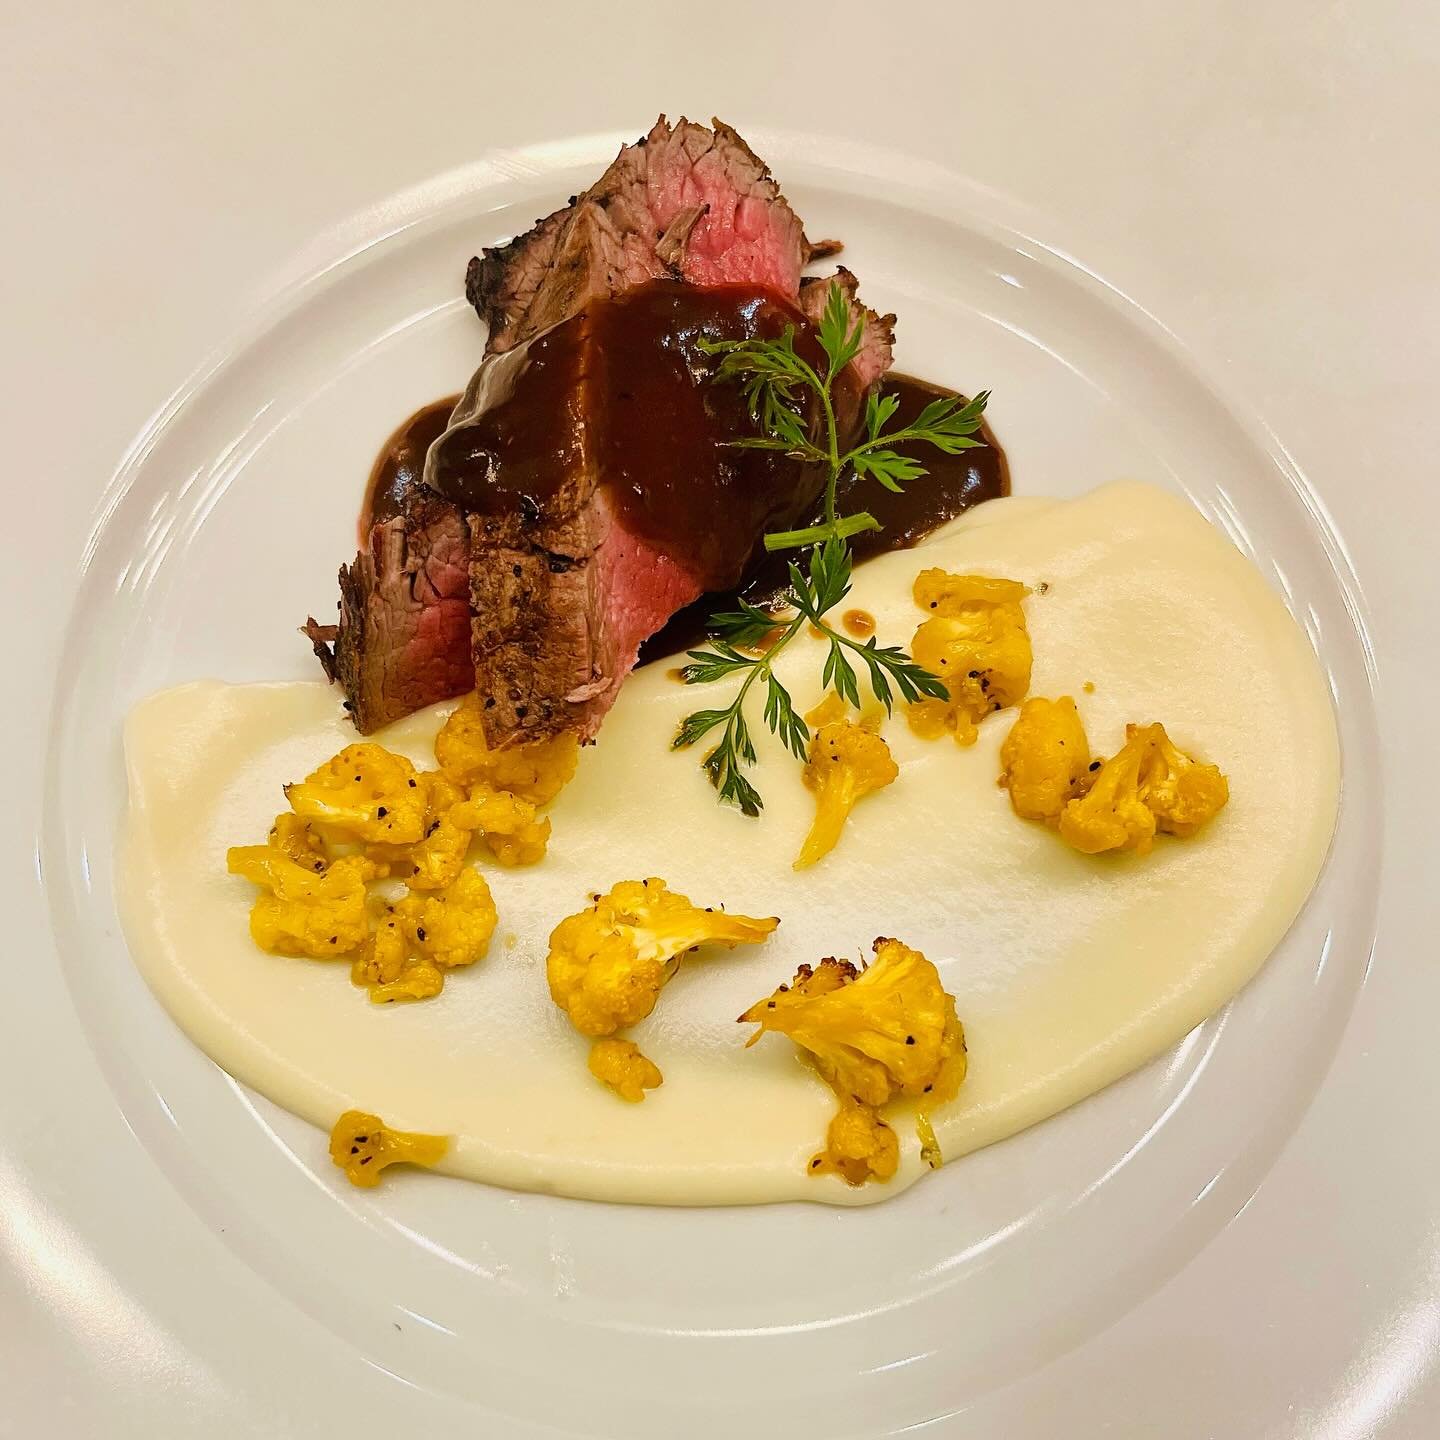 Savor the moment with my personalized in-home dining services! Elevate your gatherings as I craft unforgettable culinary experiences just for you. Book now for a memorable night of fine dining in the comfort of your own home. 

Shown above is a Beef 